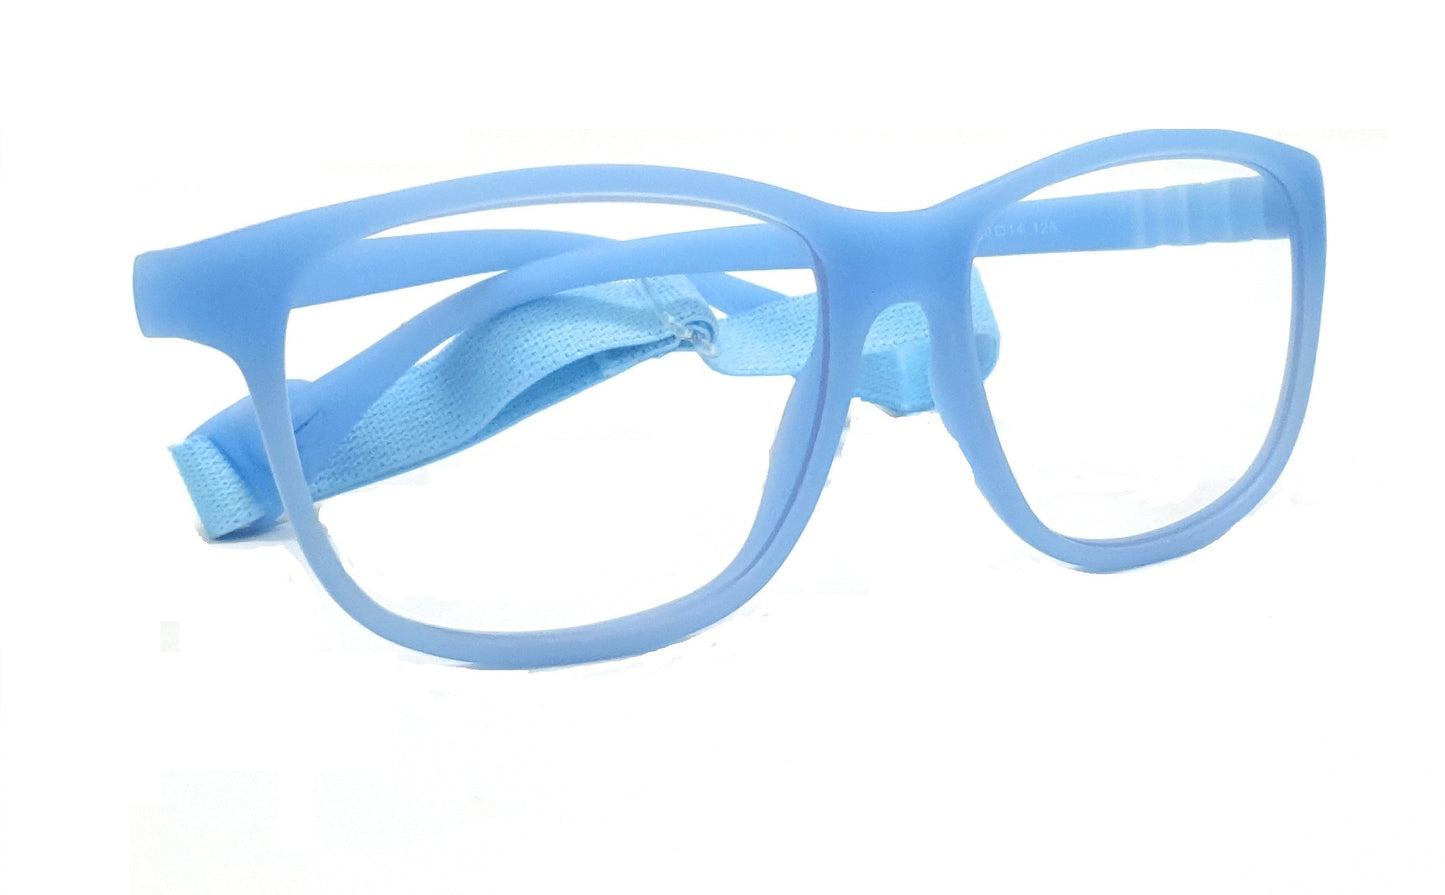 Affaires Blue Ray Block glasses Frames for Kids, Flexible, Bendable, No Screws, Glasses with anti-reflection | BC-286 (Sky Blue)